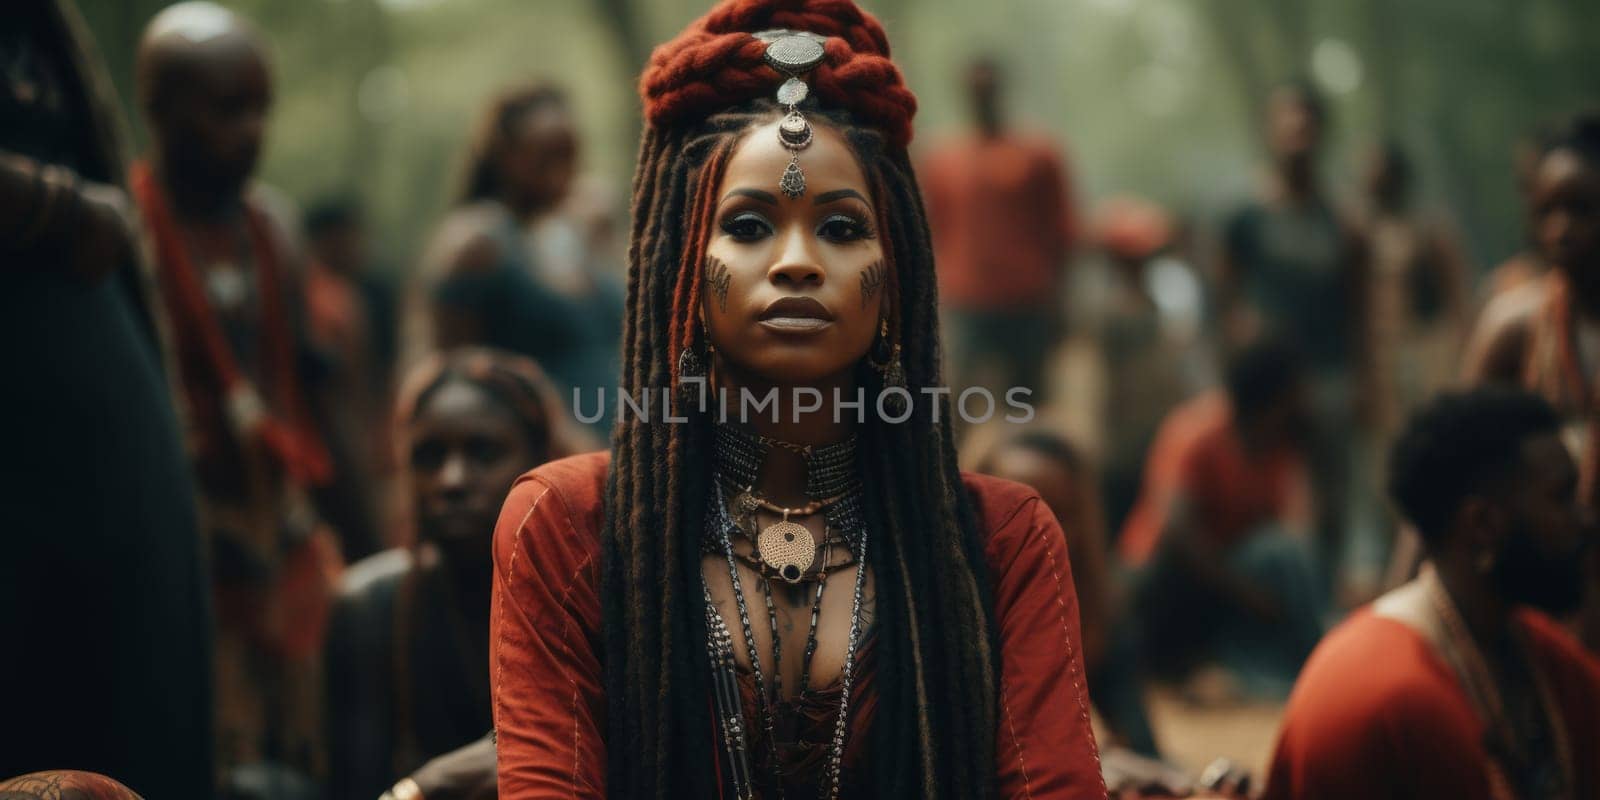 A woman with dreadlocks and a red dress sitting in front of other people, AI by starush